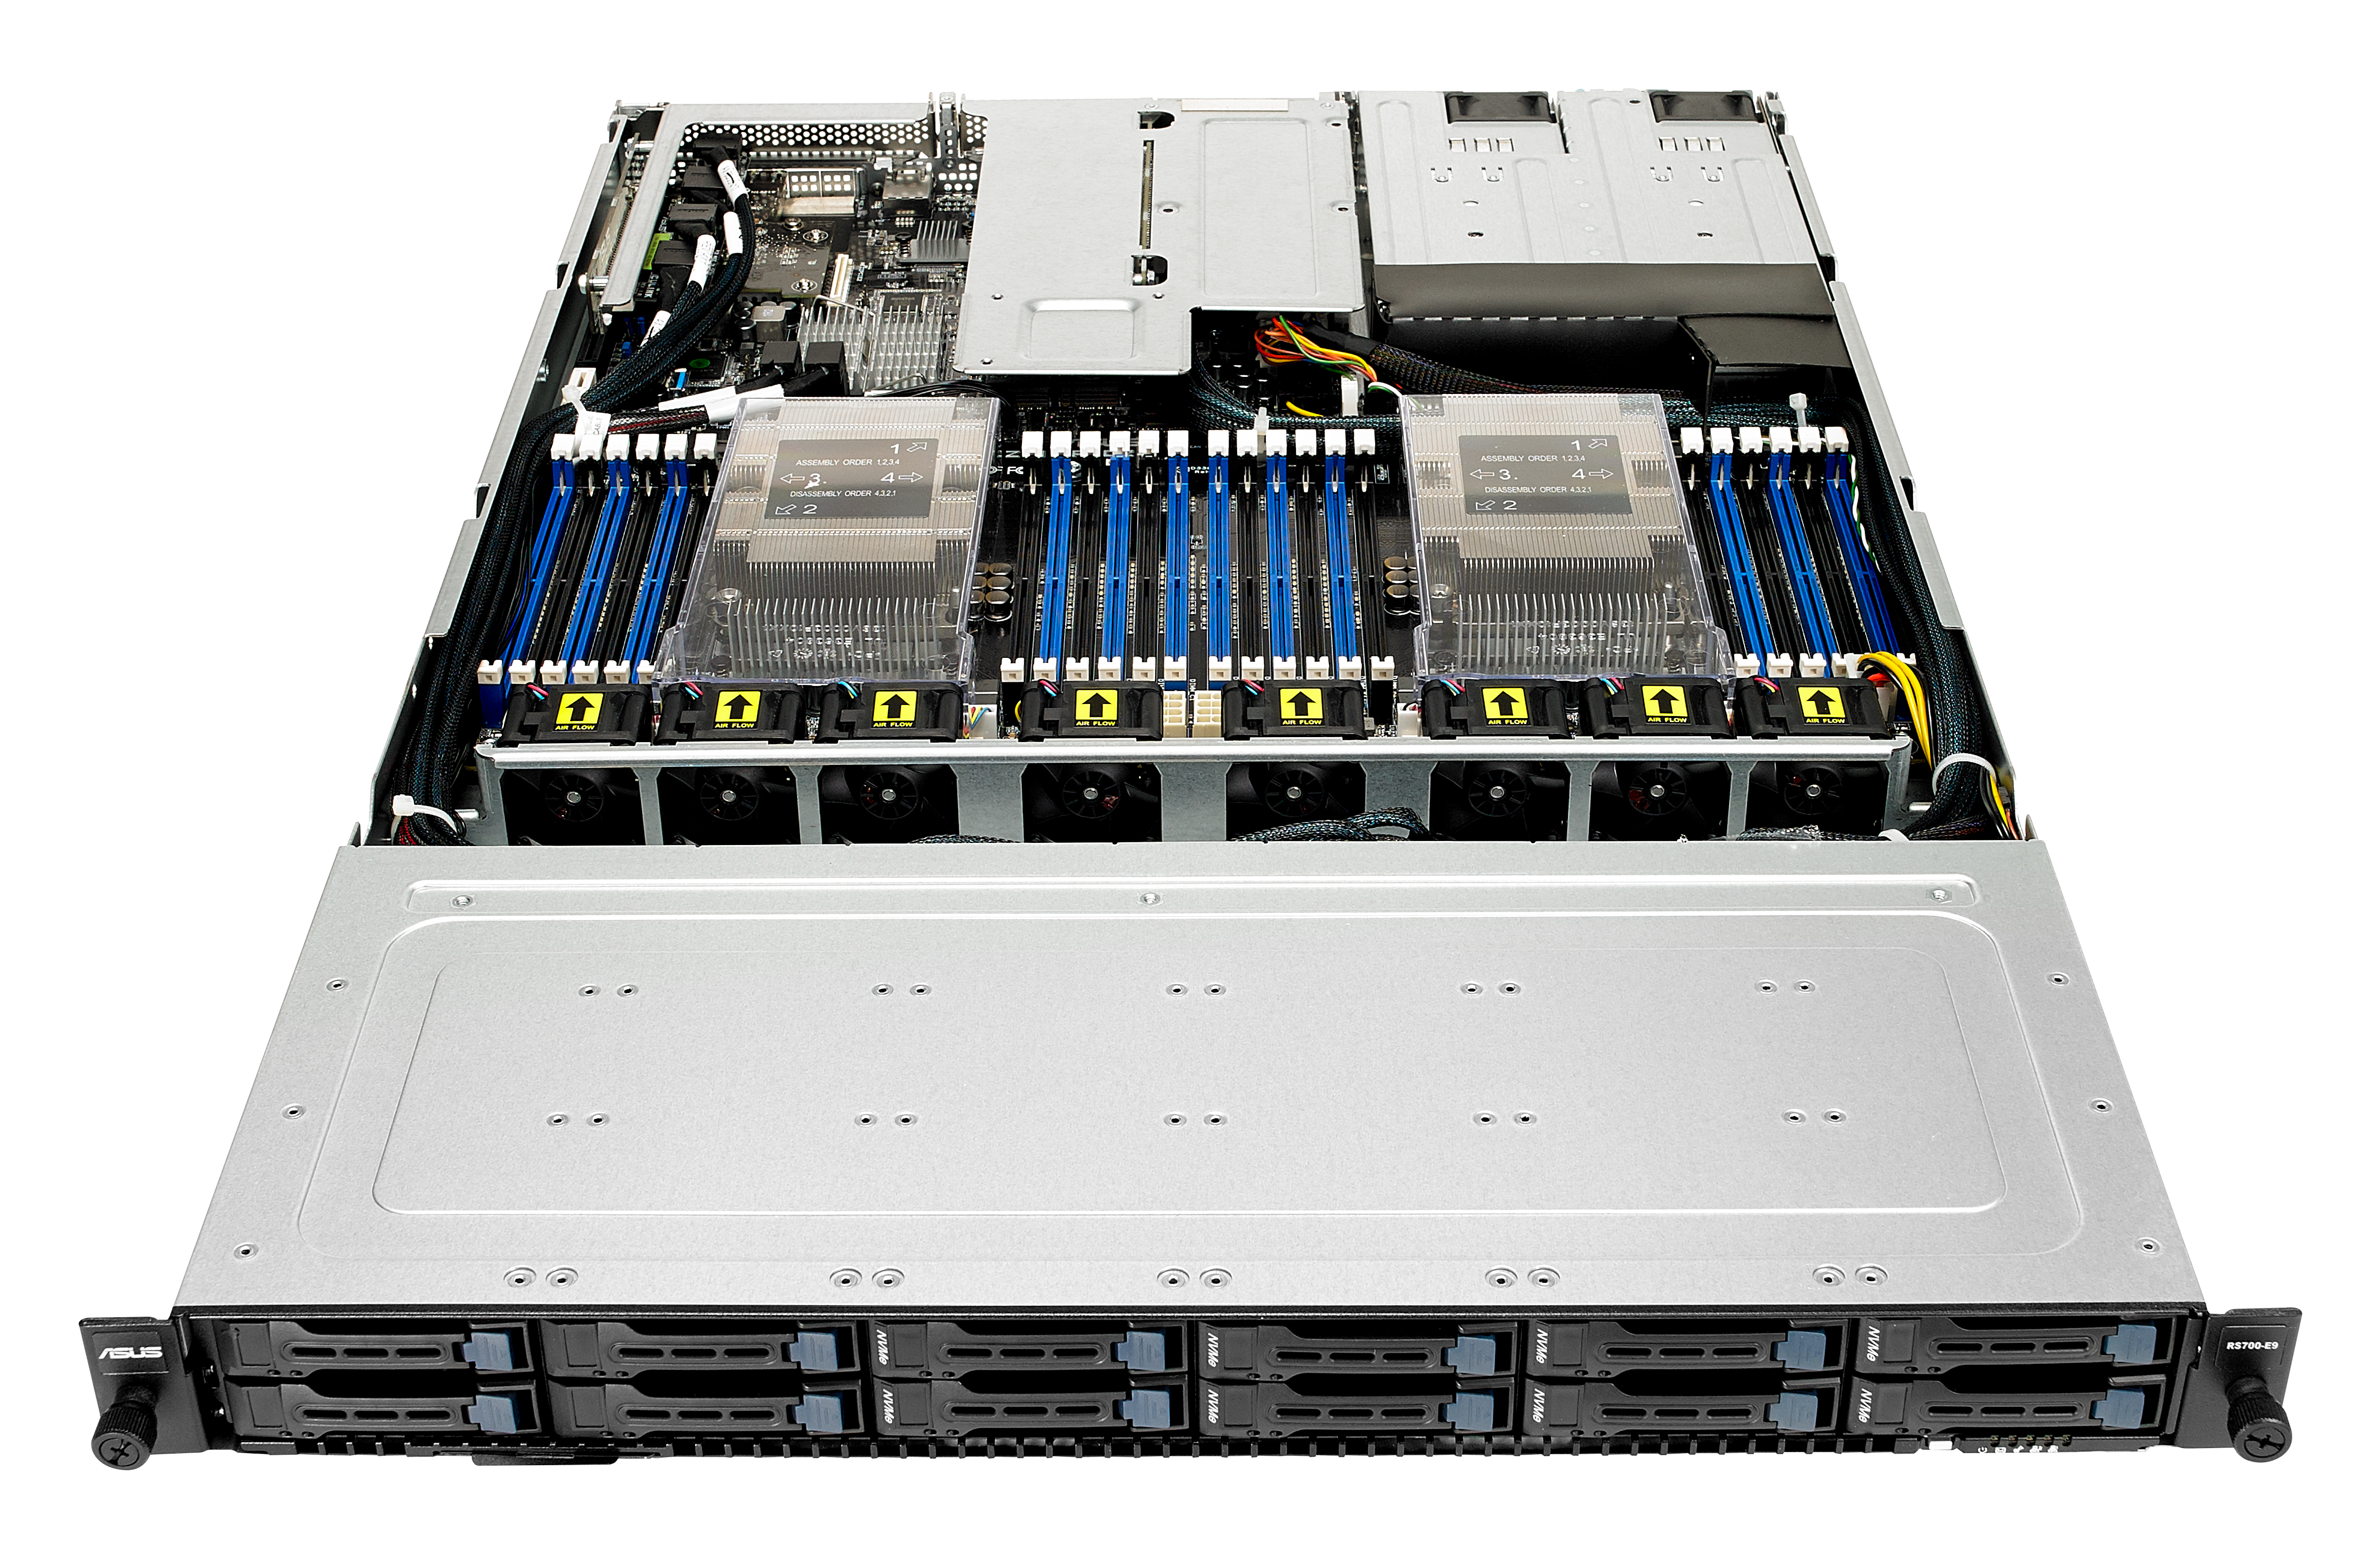 Server asus. ASUS rs700-e9-rs12. Rs700-e9-rs12. ASUS rs700-e9-rs12 4nvme. ASUS rs300-e11-rs4.